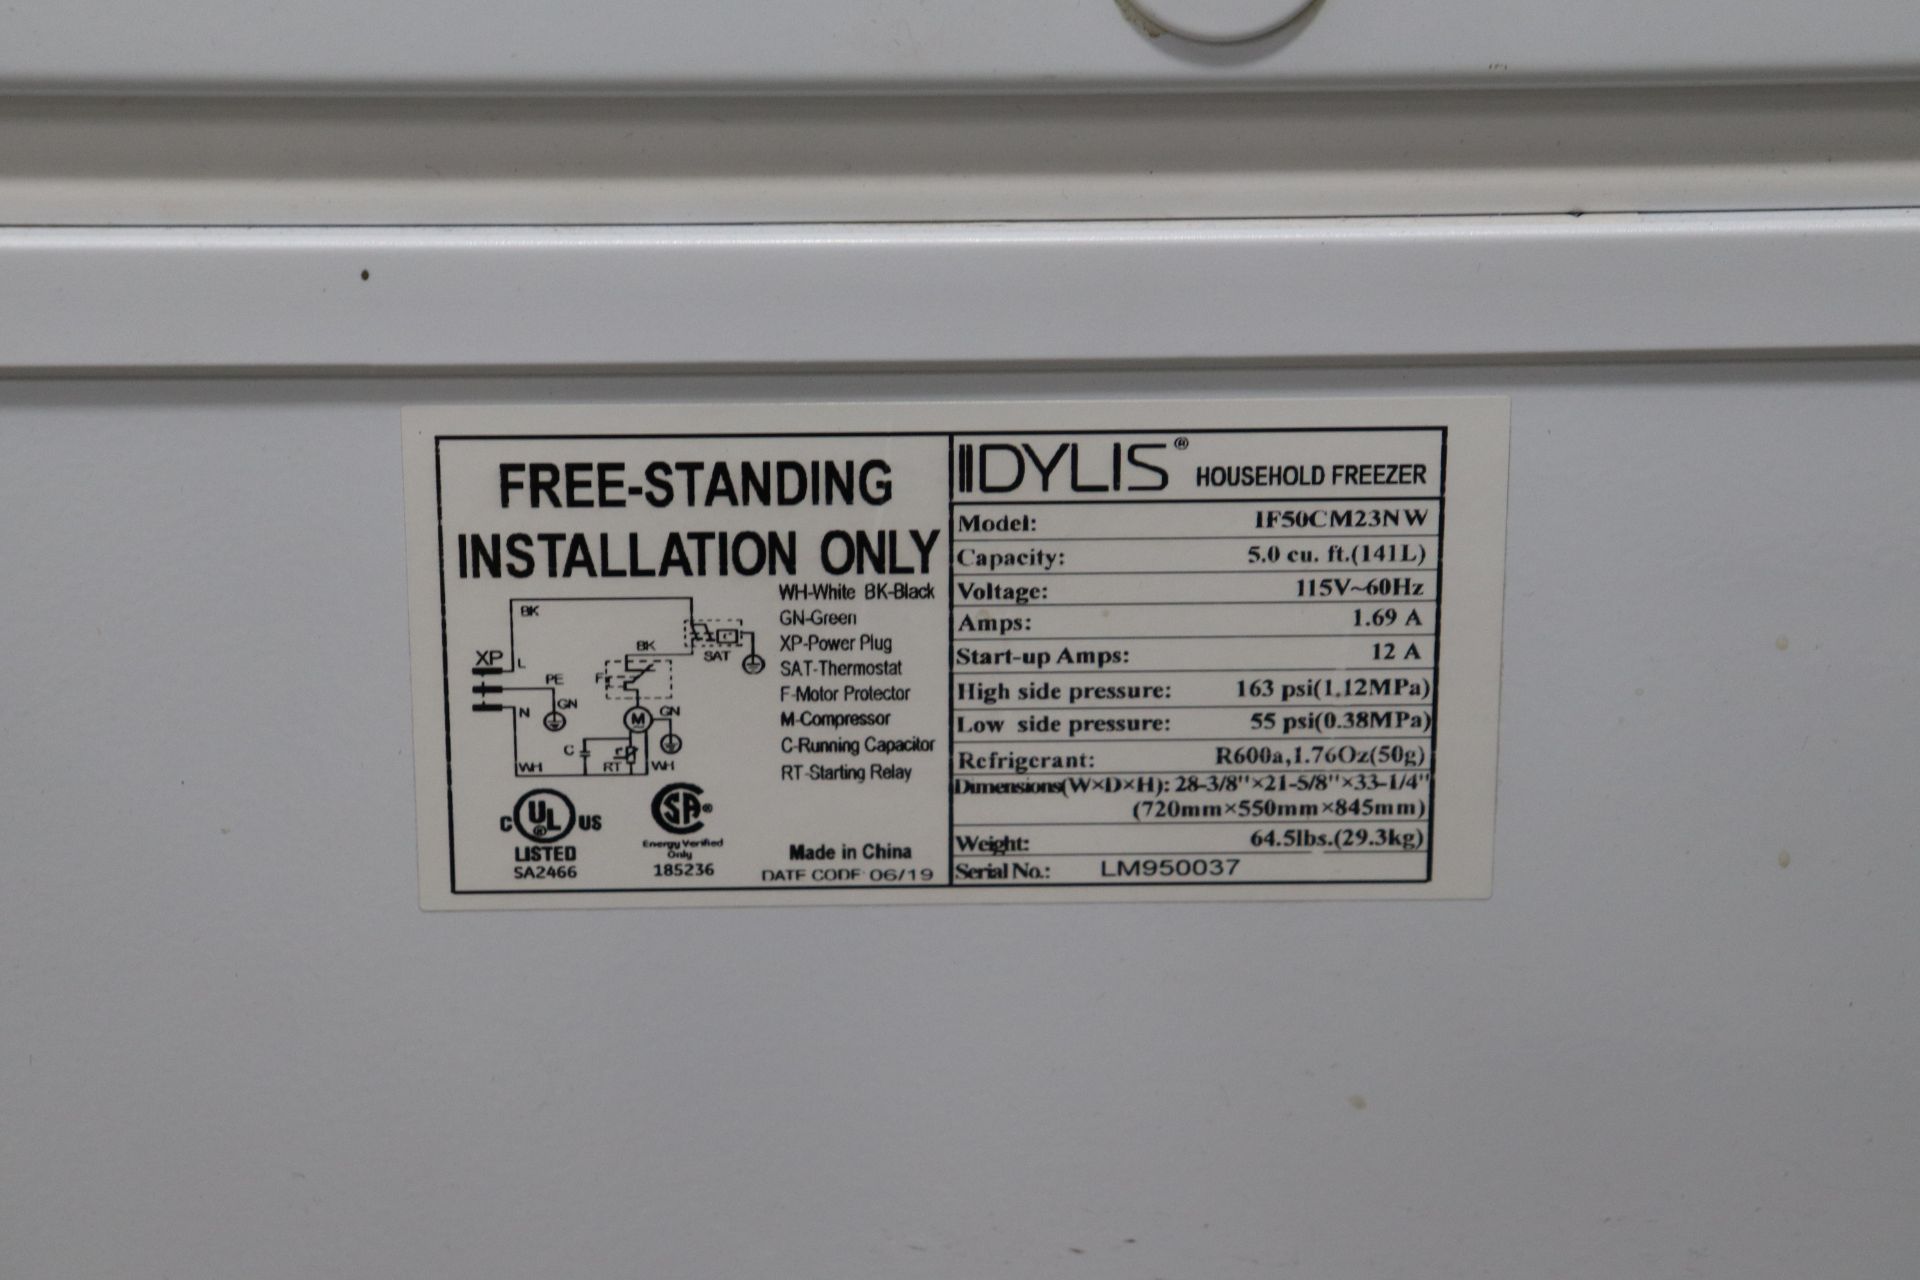 Idylis Chest Freezer, 5 cubit foot capacity, Model IF50CM23NW, Serial LM950037, 39" x 22" x 33" - Image 5 of 6